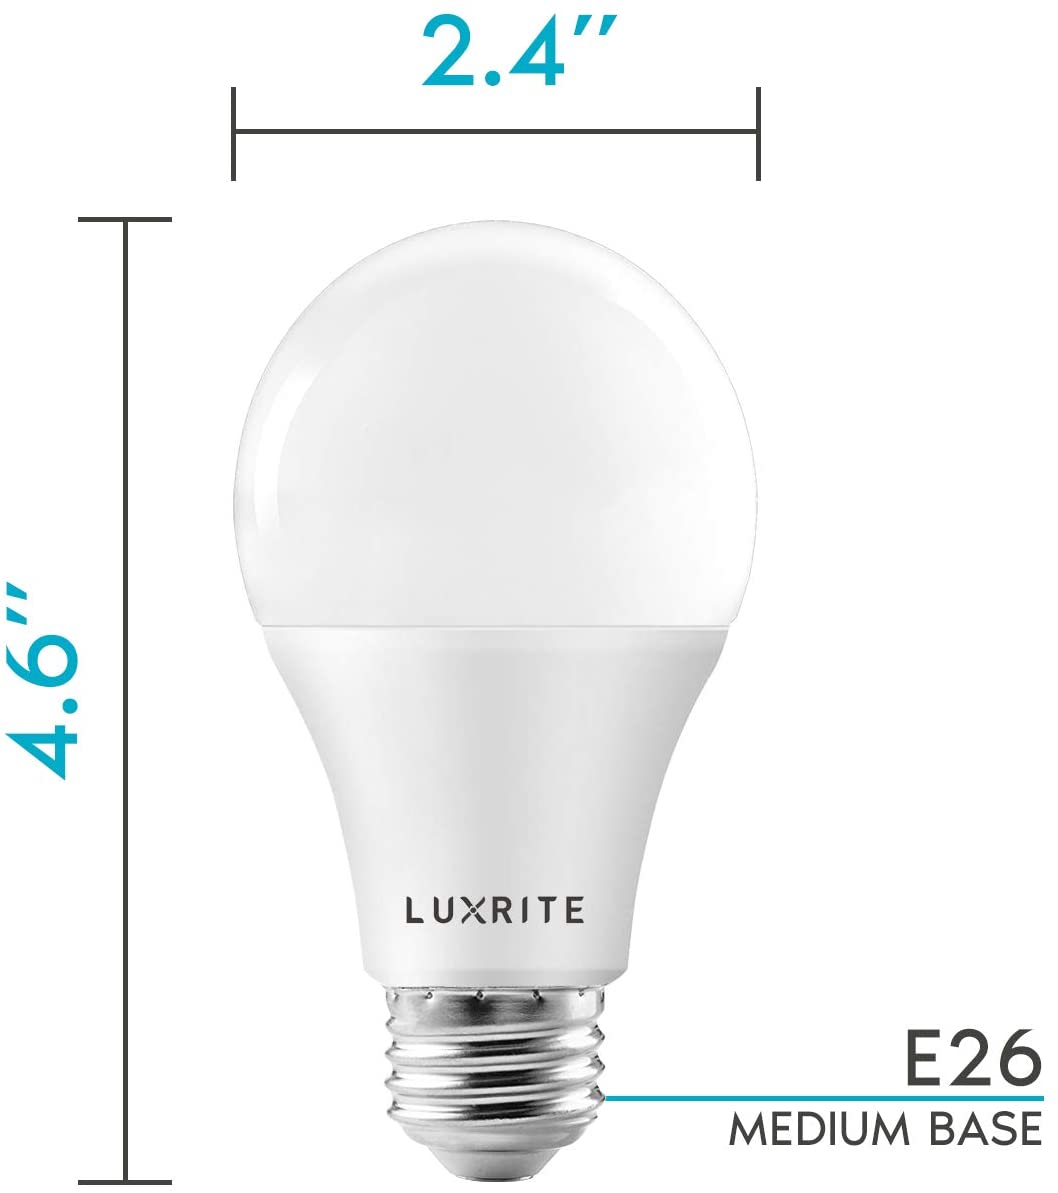 Luxrite LR21444 Indoor and Outdoor A19 LED Light Bulb 100 Watt Equivalent Dimmable,1600 Lumens, Enclosed Fixture Rated, 15W, Energy Star, E26 Base